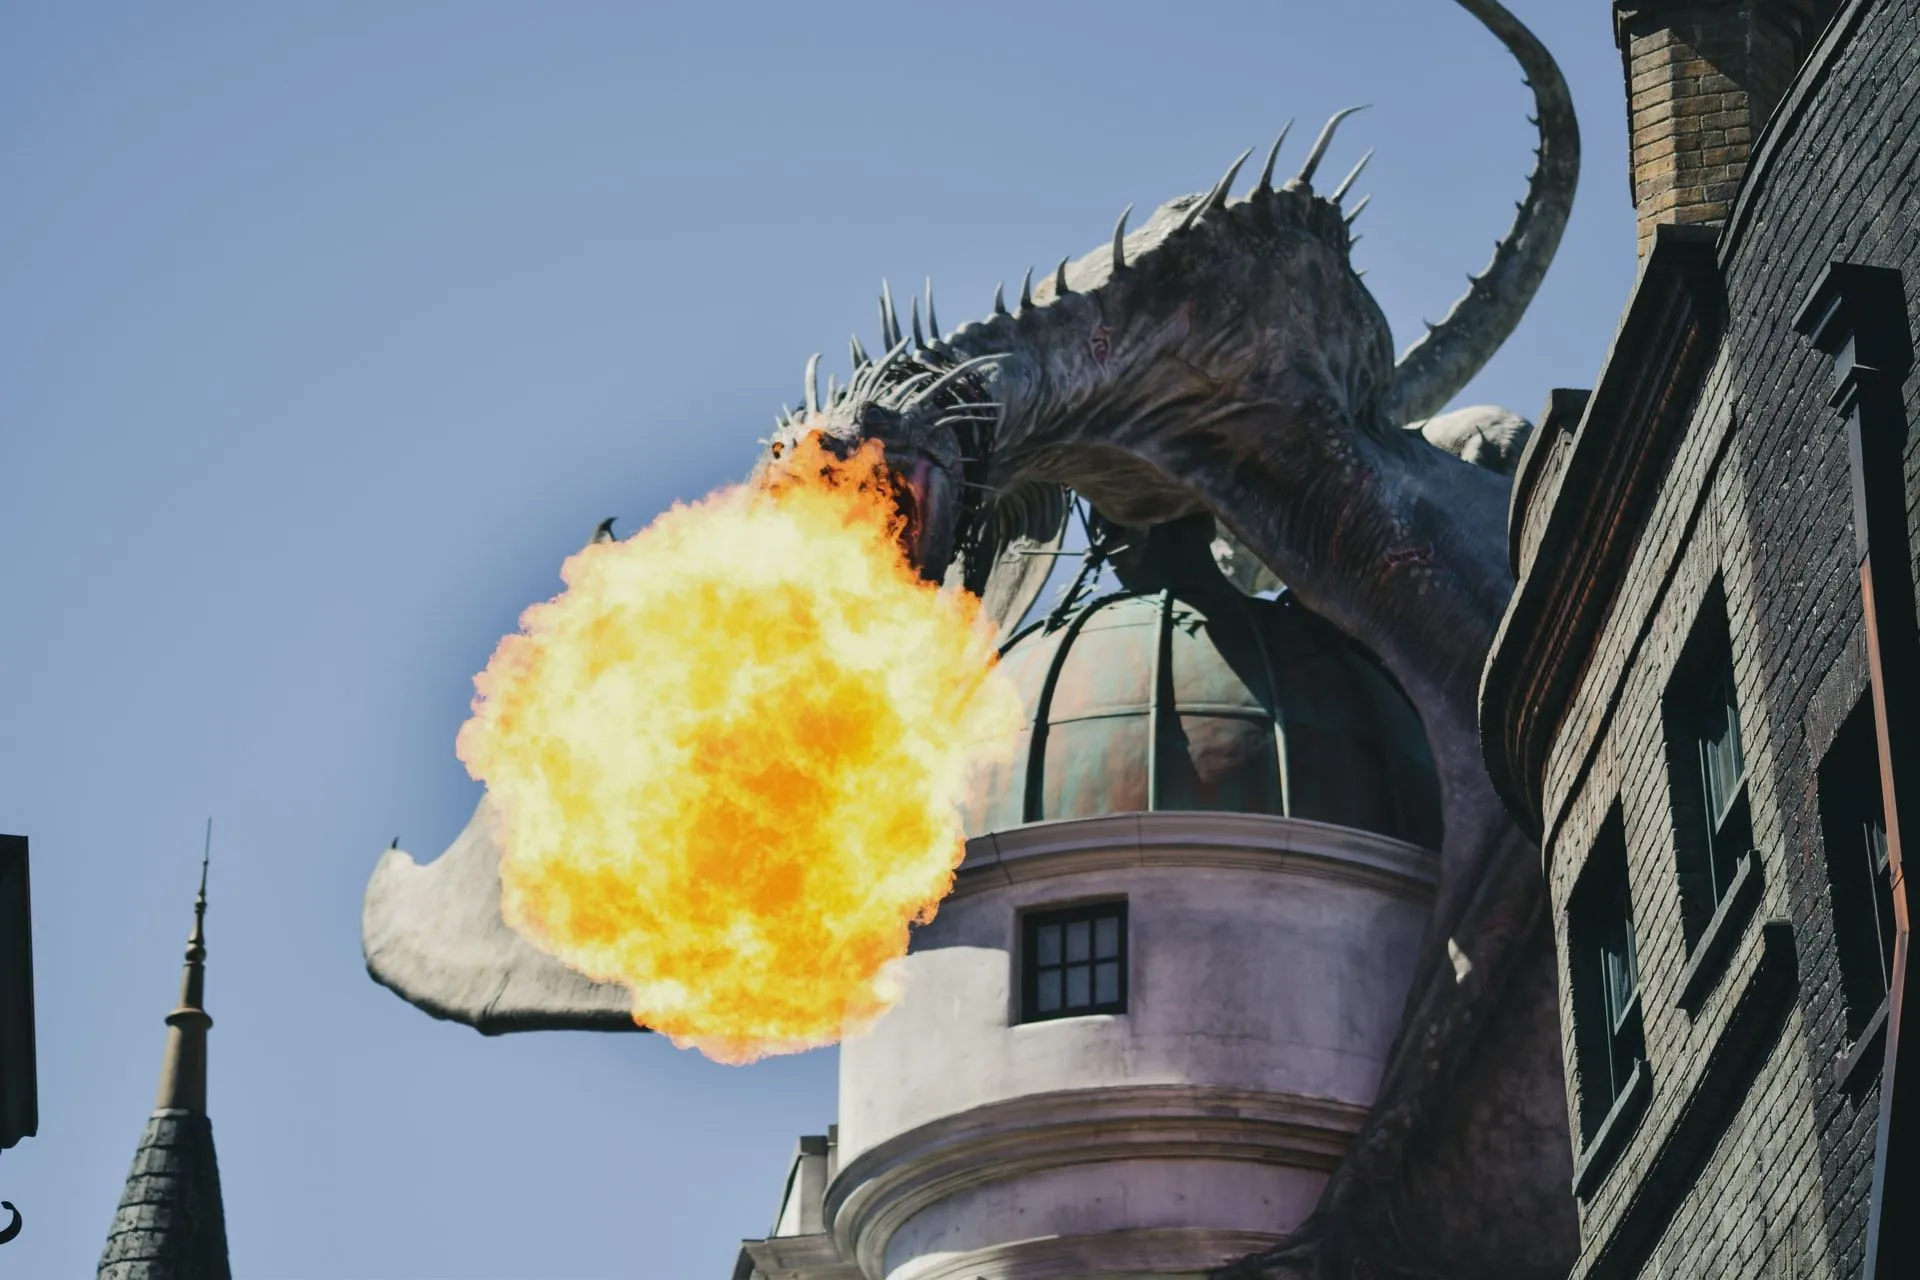 A fiery dragon expelling fire out of it's mouth sitting over a tower